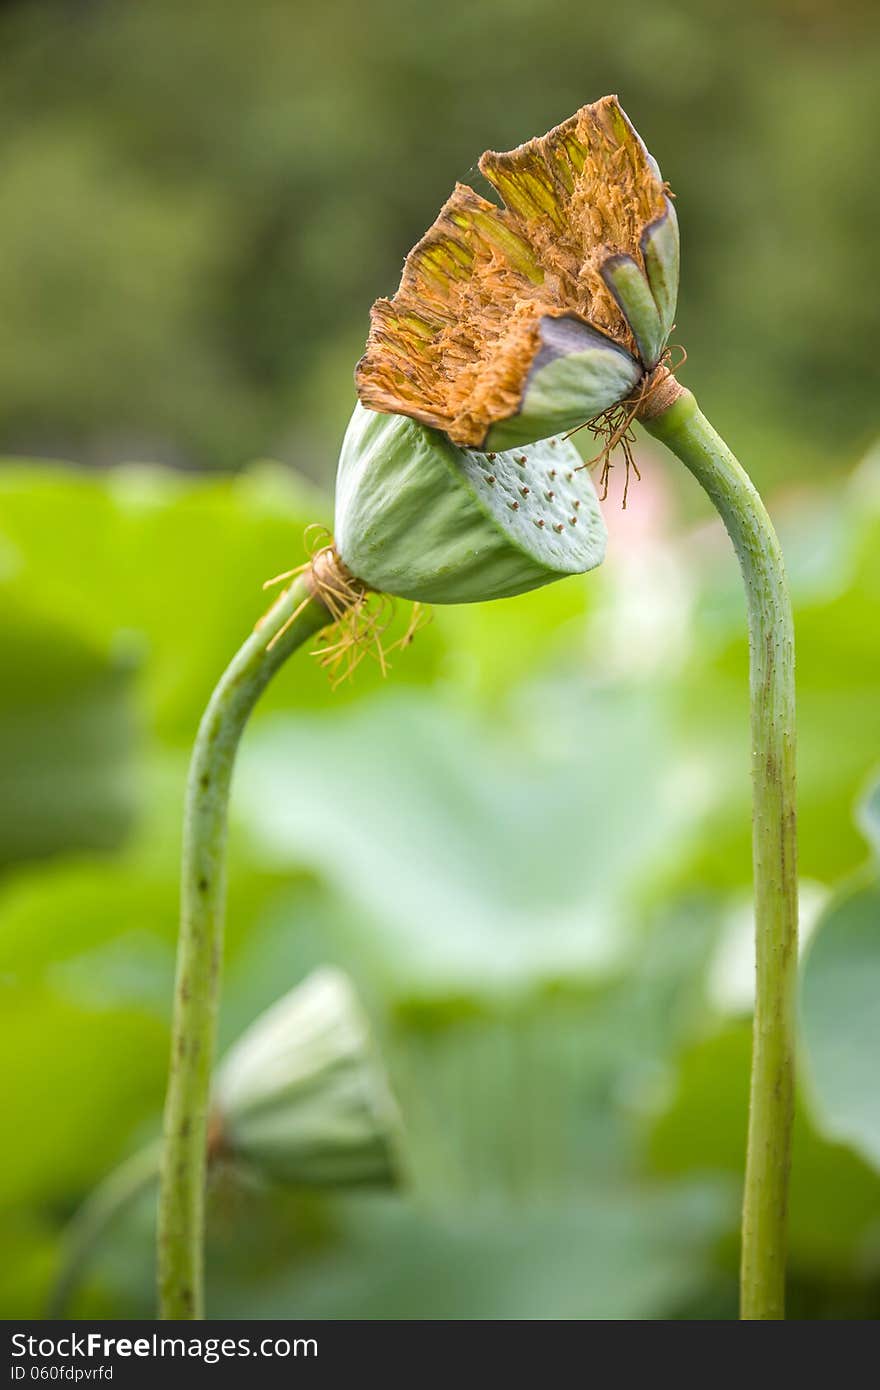 Wilted lotus seed pod in pond